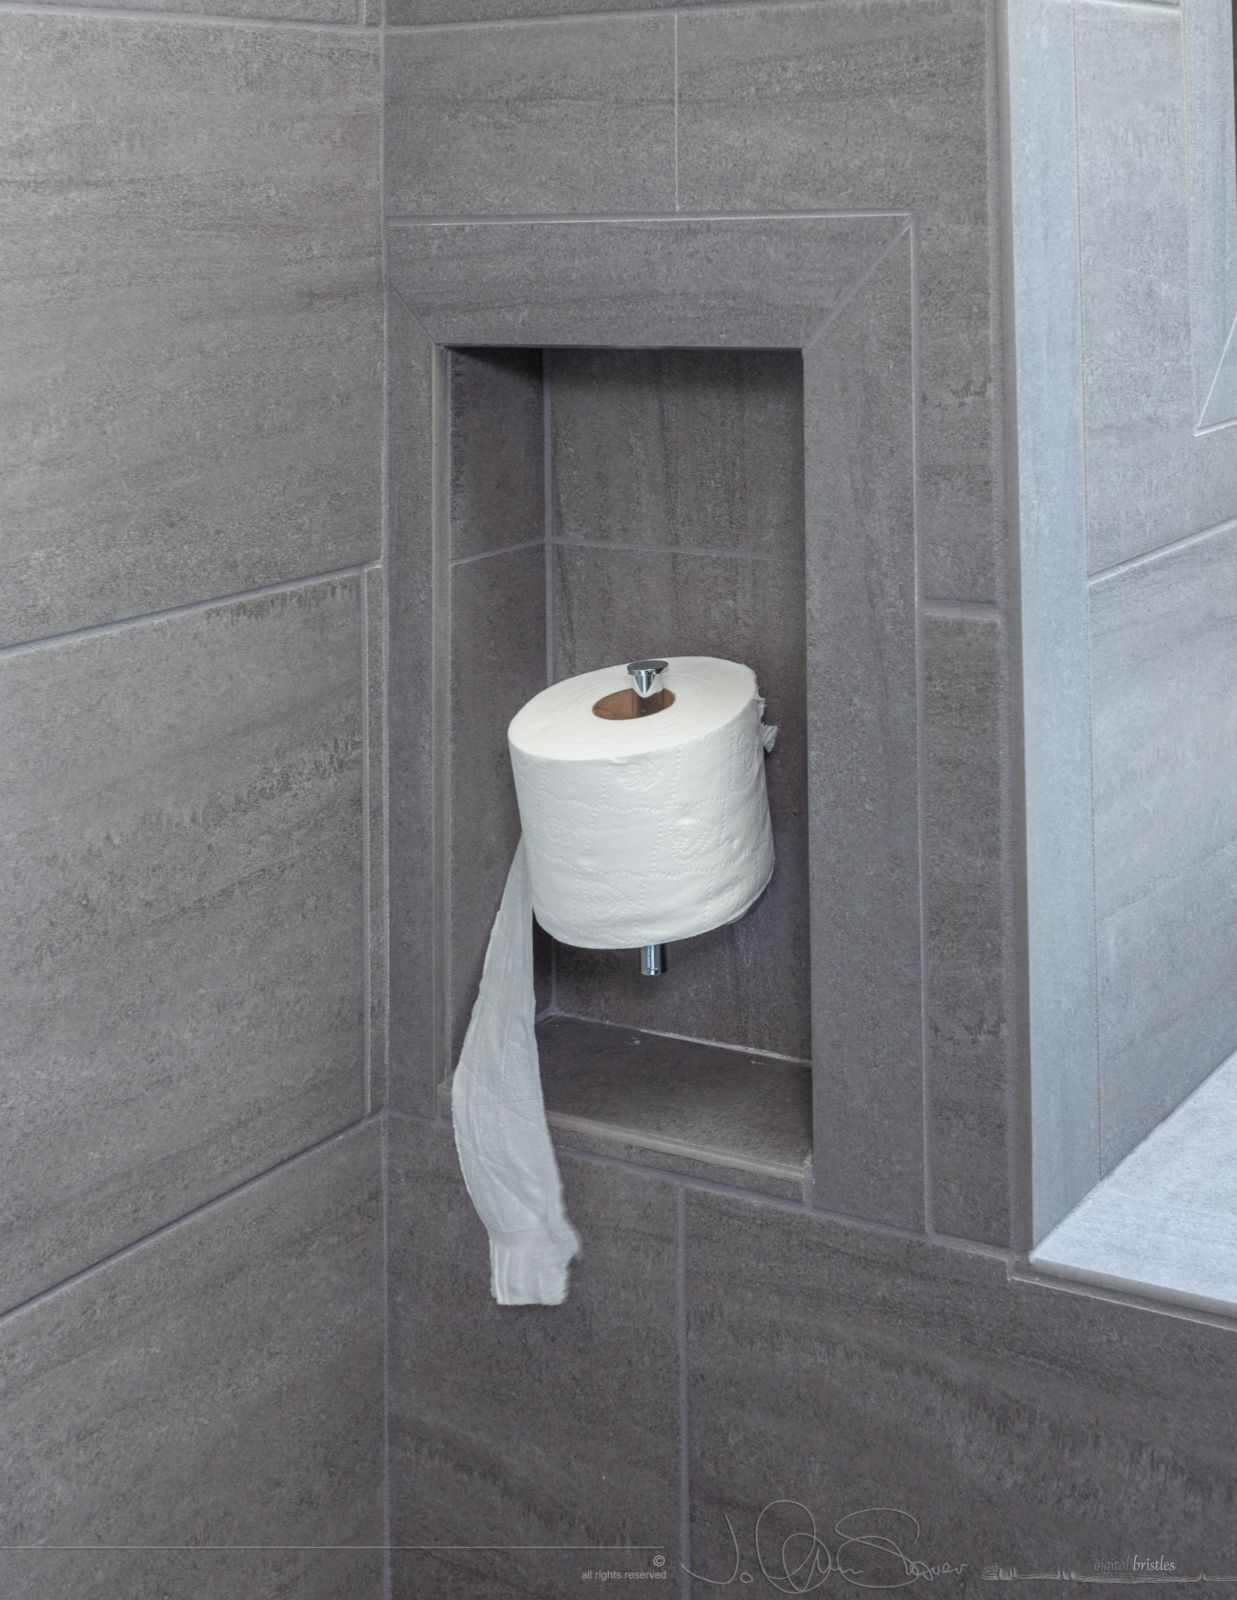 Lowly toilet paper holder - essential nevertheless. April 27th